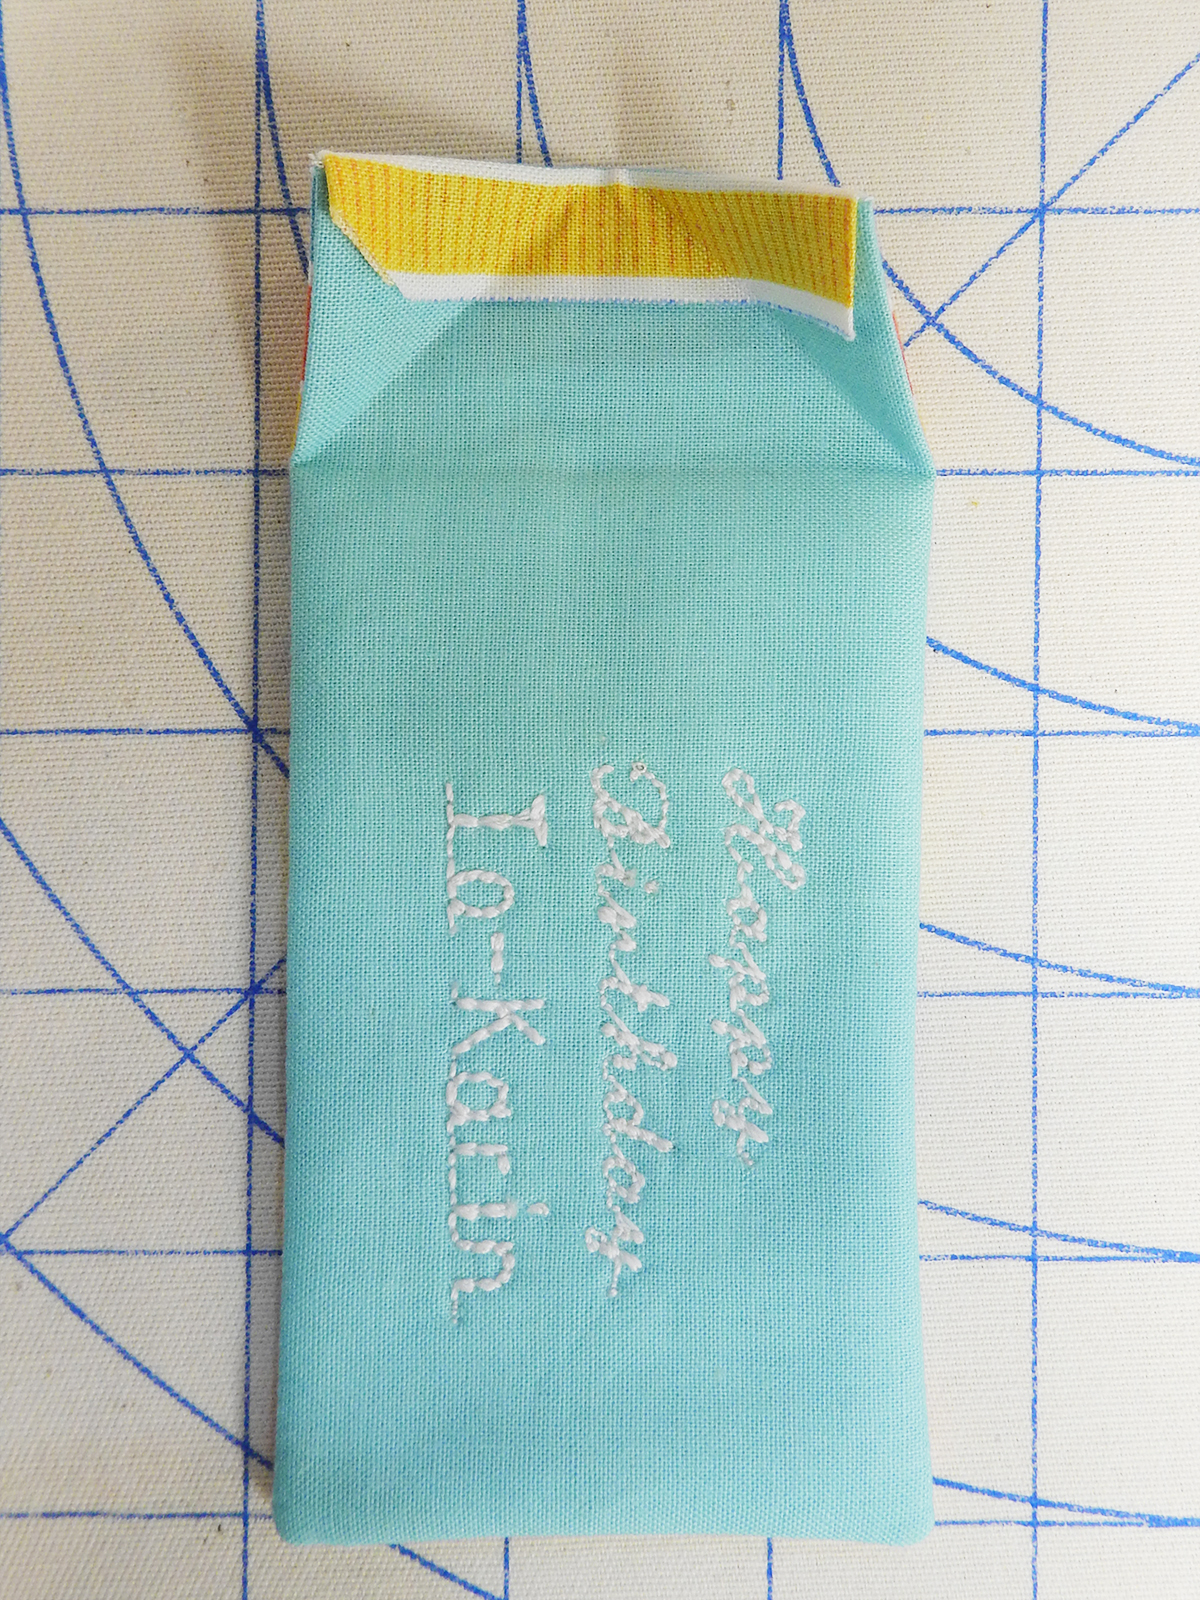 Personalized Fabric Gift Tag Steps 8 & 9: Pressing the top edge of the gift tag.